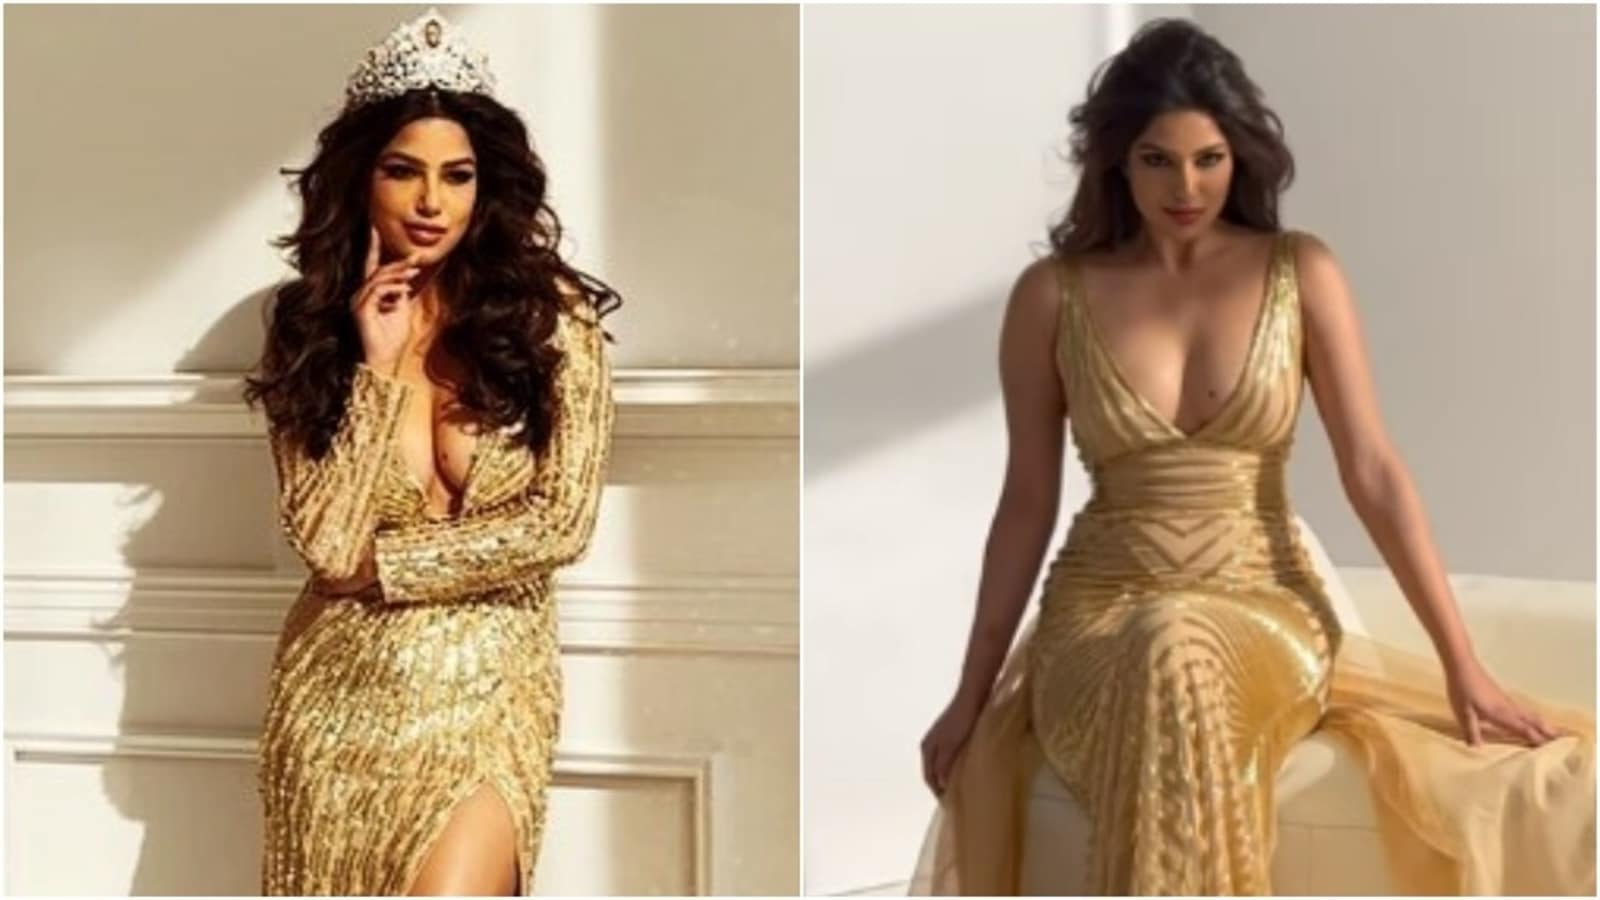 Harnaaz Sandhu in two classy looks turns up the hotness quotient